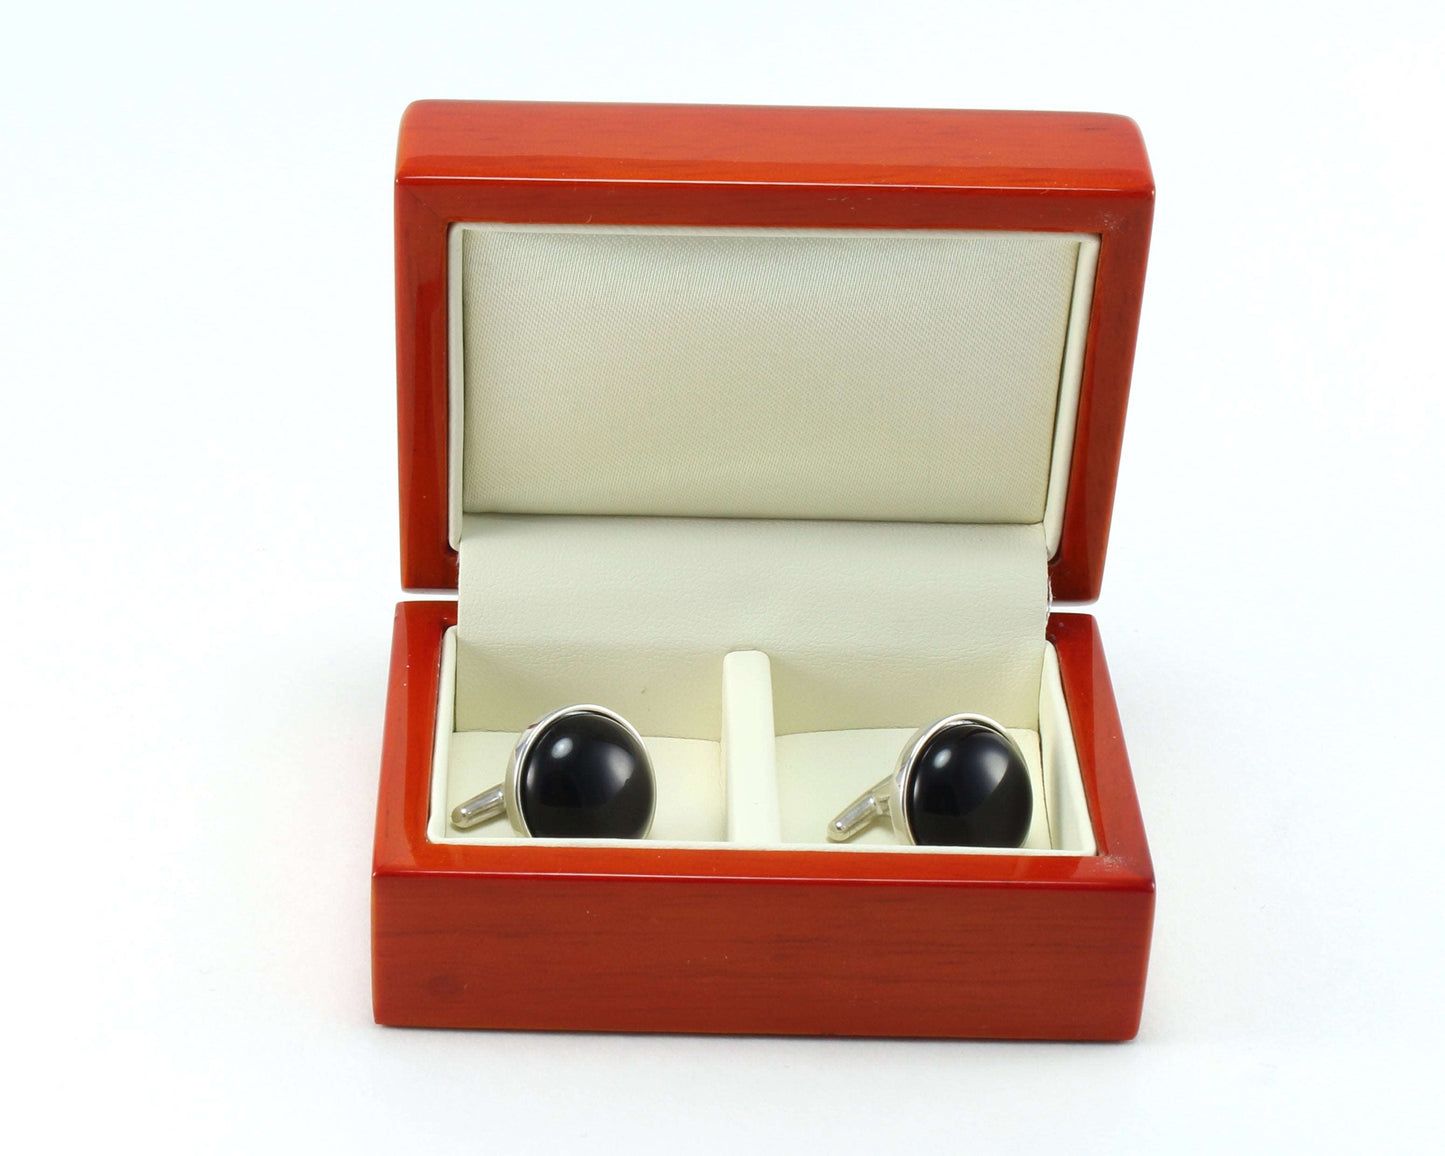 925 Sterling Silver Cuff Links with Black Onyx